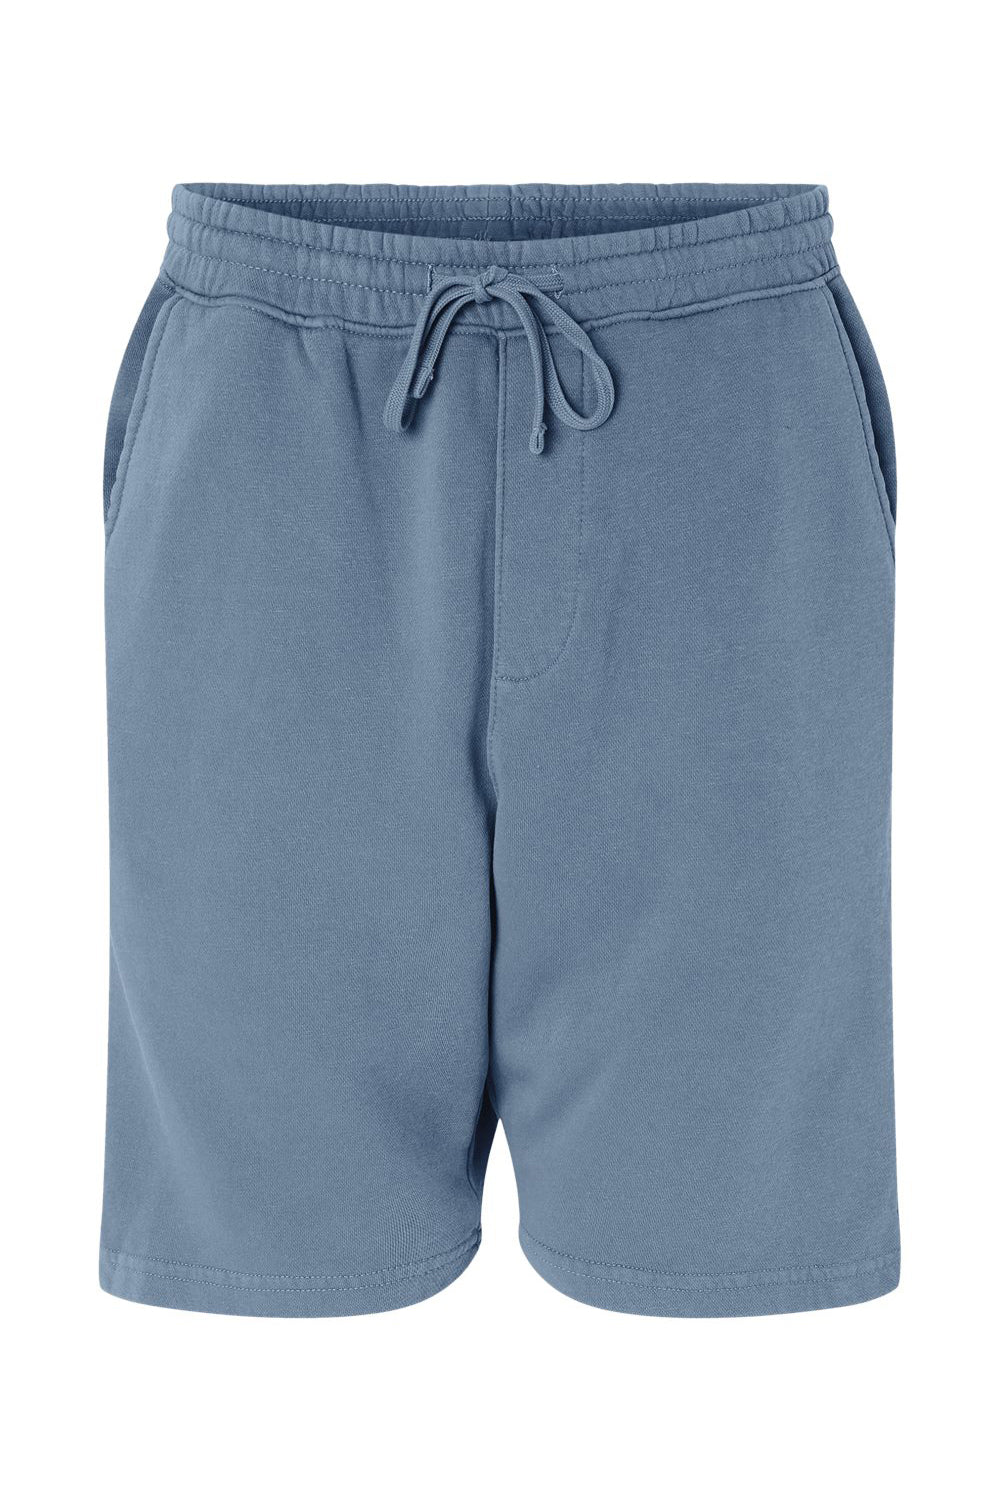 Independent Trading Co. PRM50STPD Mens Pigment Dyed Fleece Shorts w/ Pockets Slate Blue Flat Front